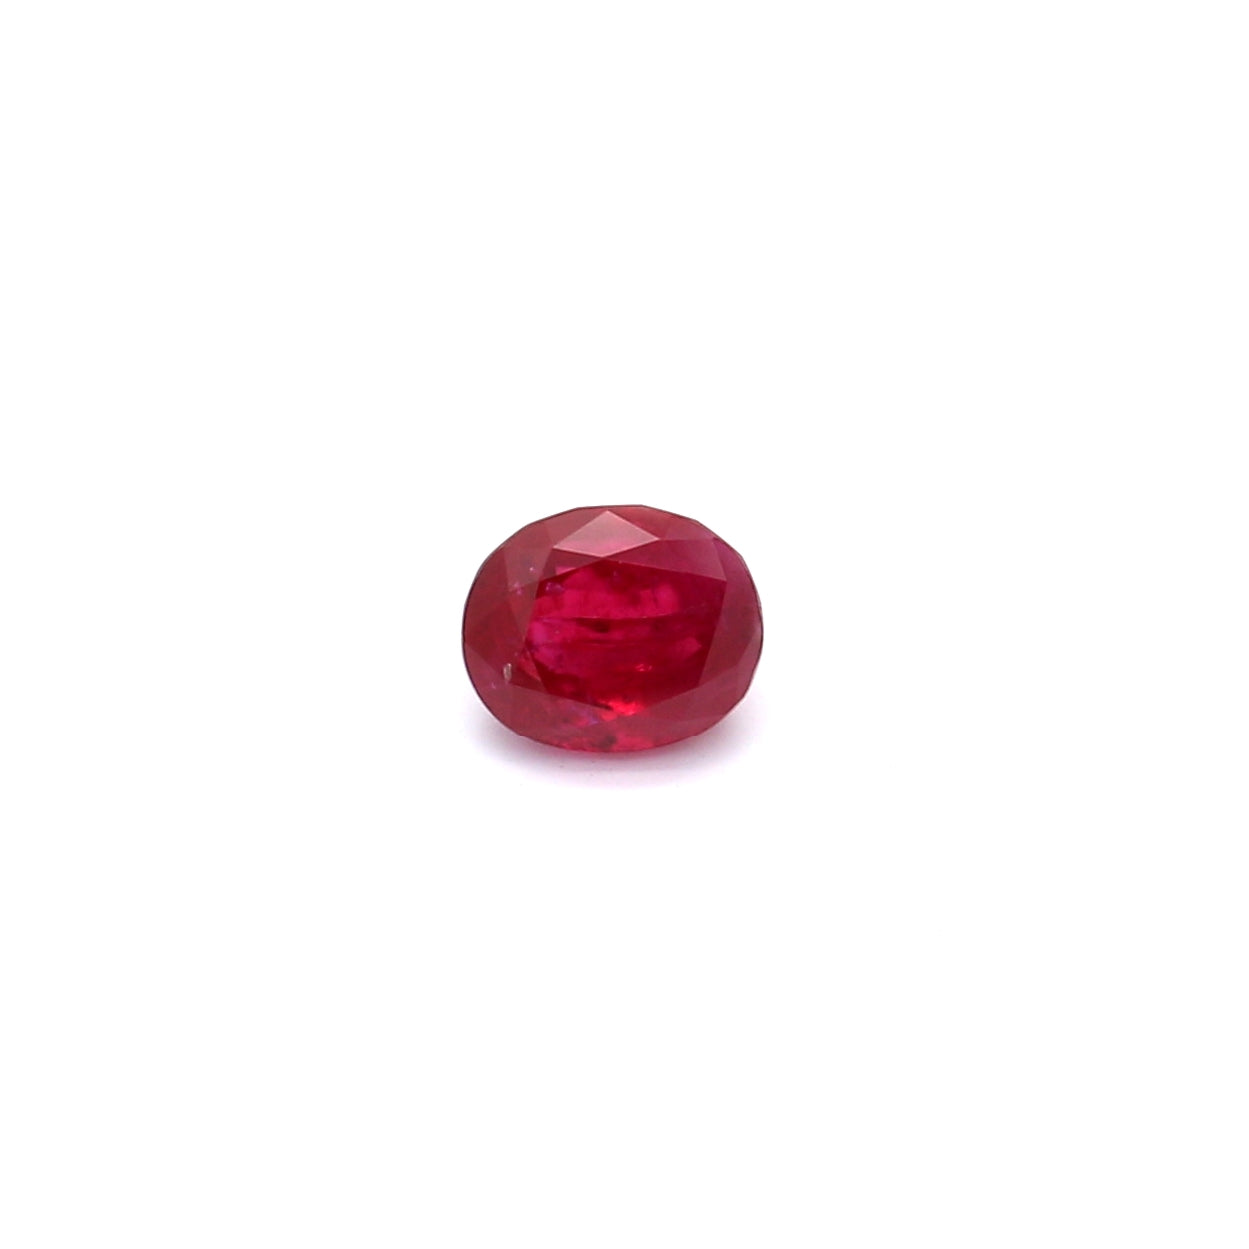 0.75ct Oval Ruby, No Heat + Oil, East Africa - 5.31 x 4.44 x 3.37mm